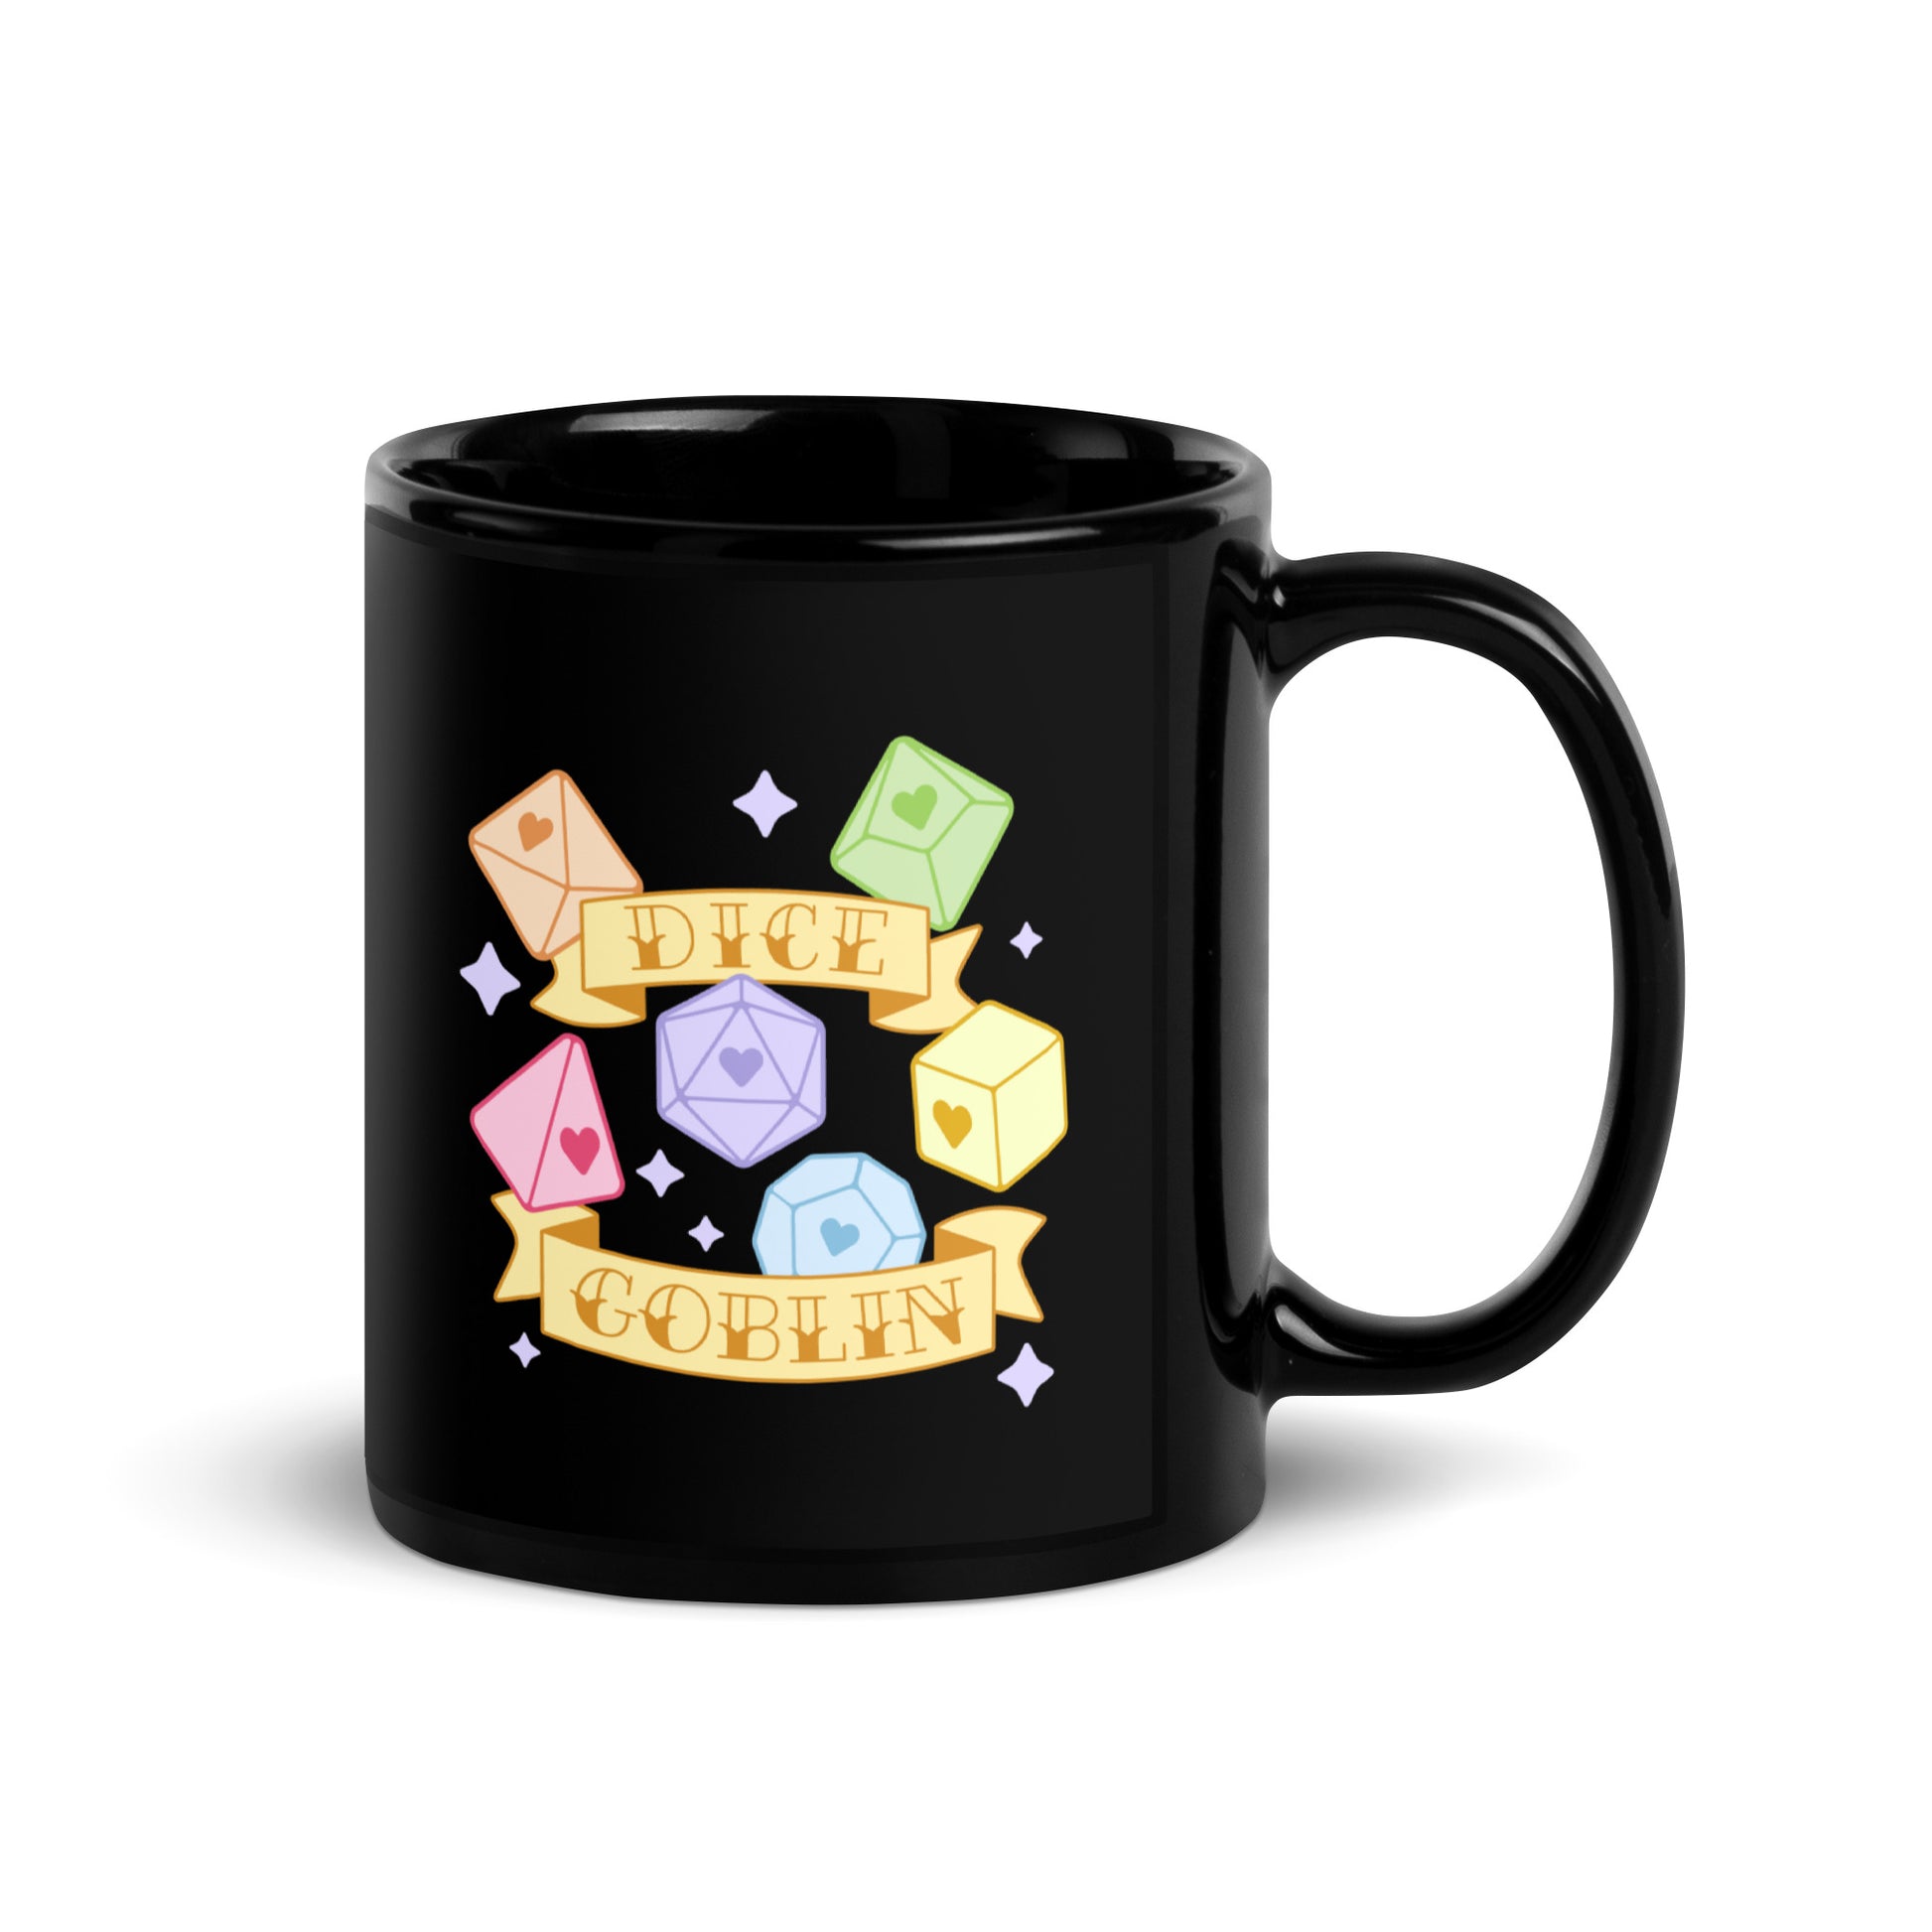 A black 11 ounce ceramic mug featuring an illustration of six polyhedral dice in pastel rainbow colors. Banners surround the dice. Text on the banners reads "Dice Goblin"